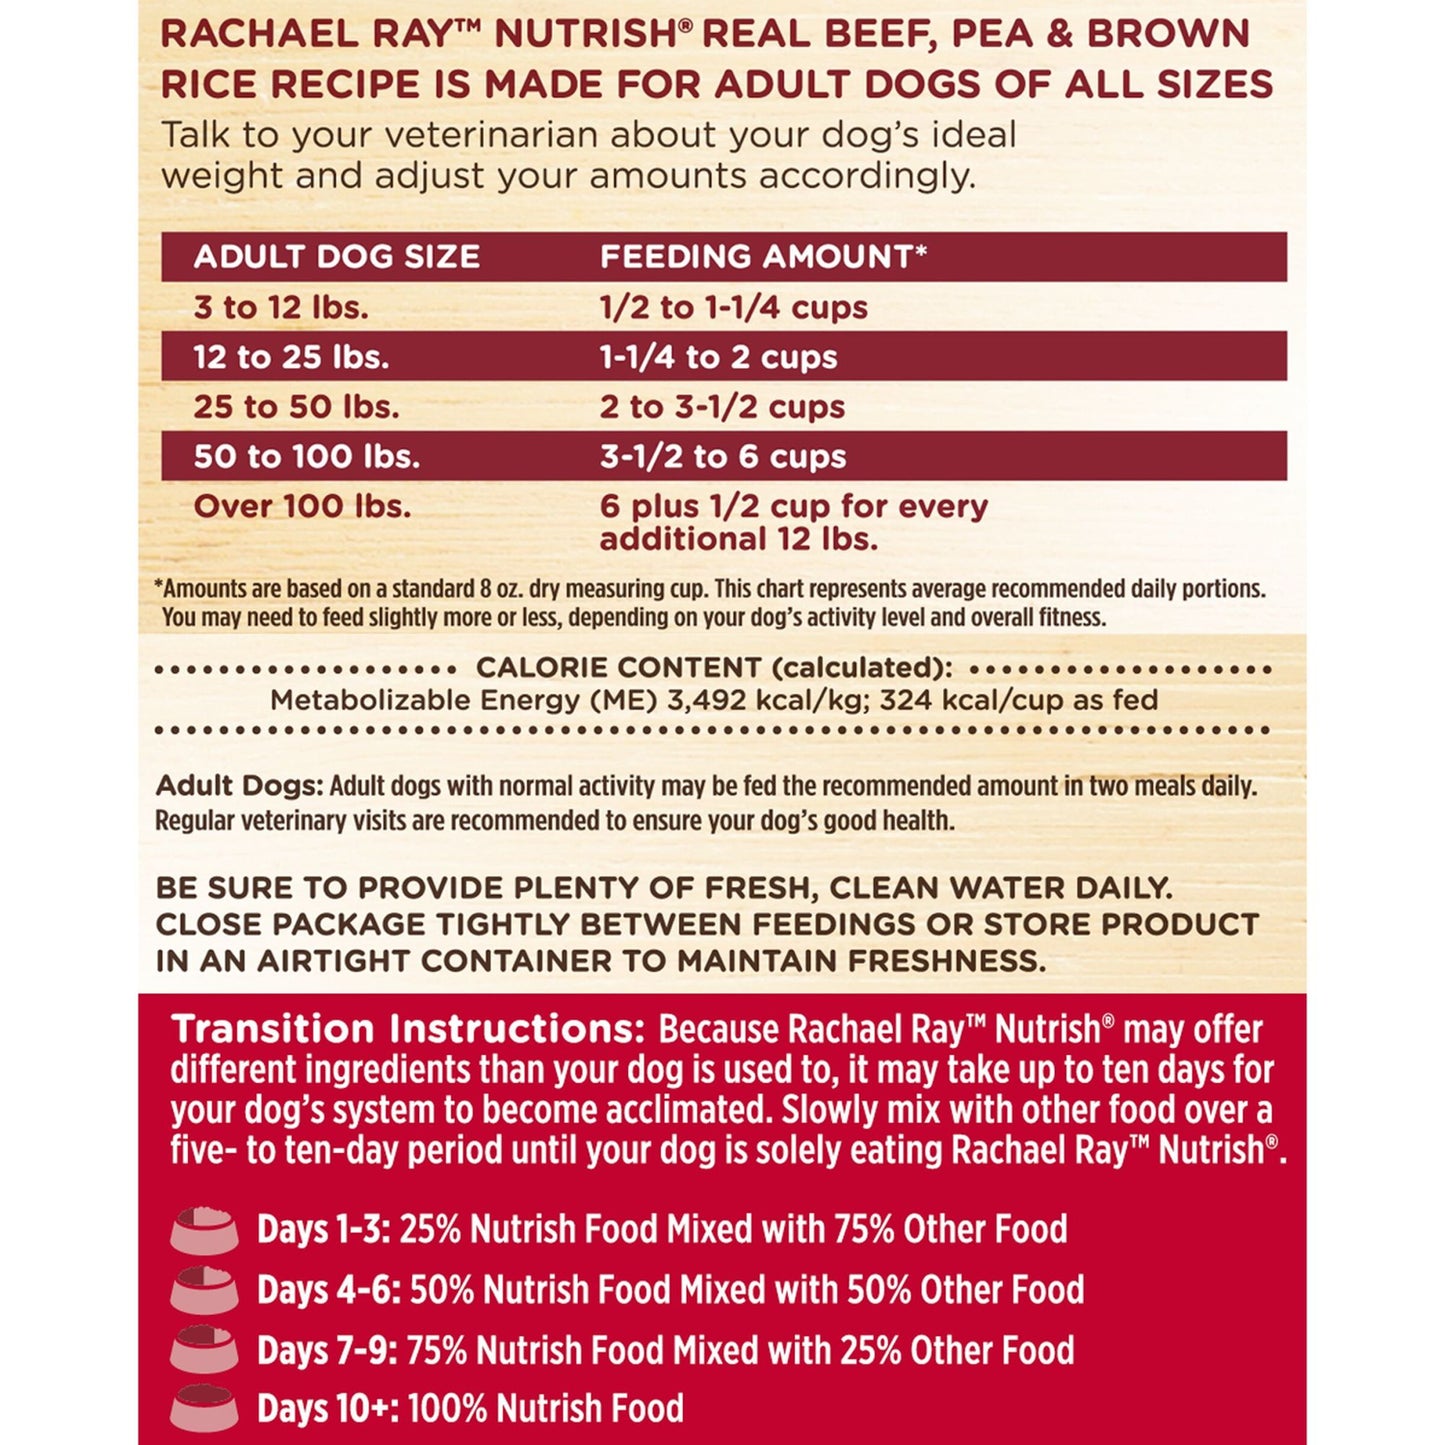 Rachael Ray Nutrish Real Beef, Peas Brown Rice Recipe Natural Food for Dogs, 6 Lb